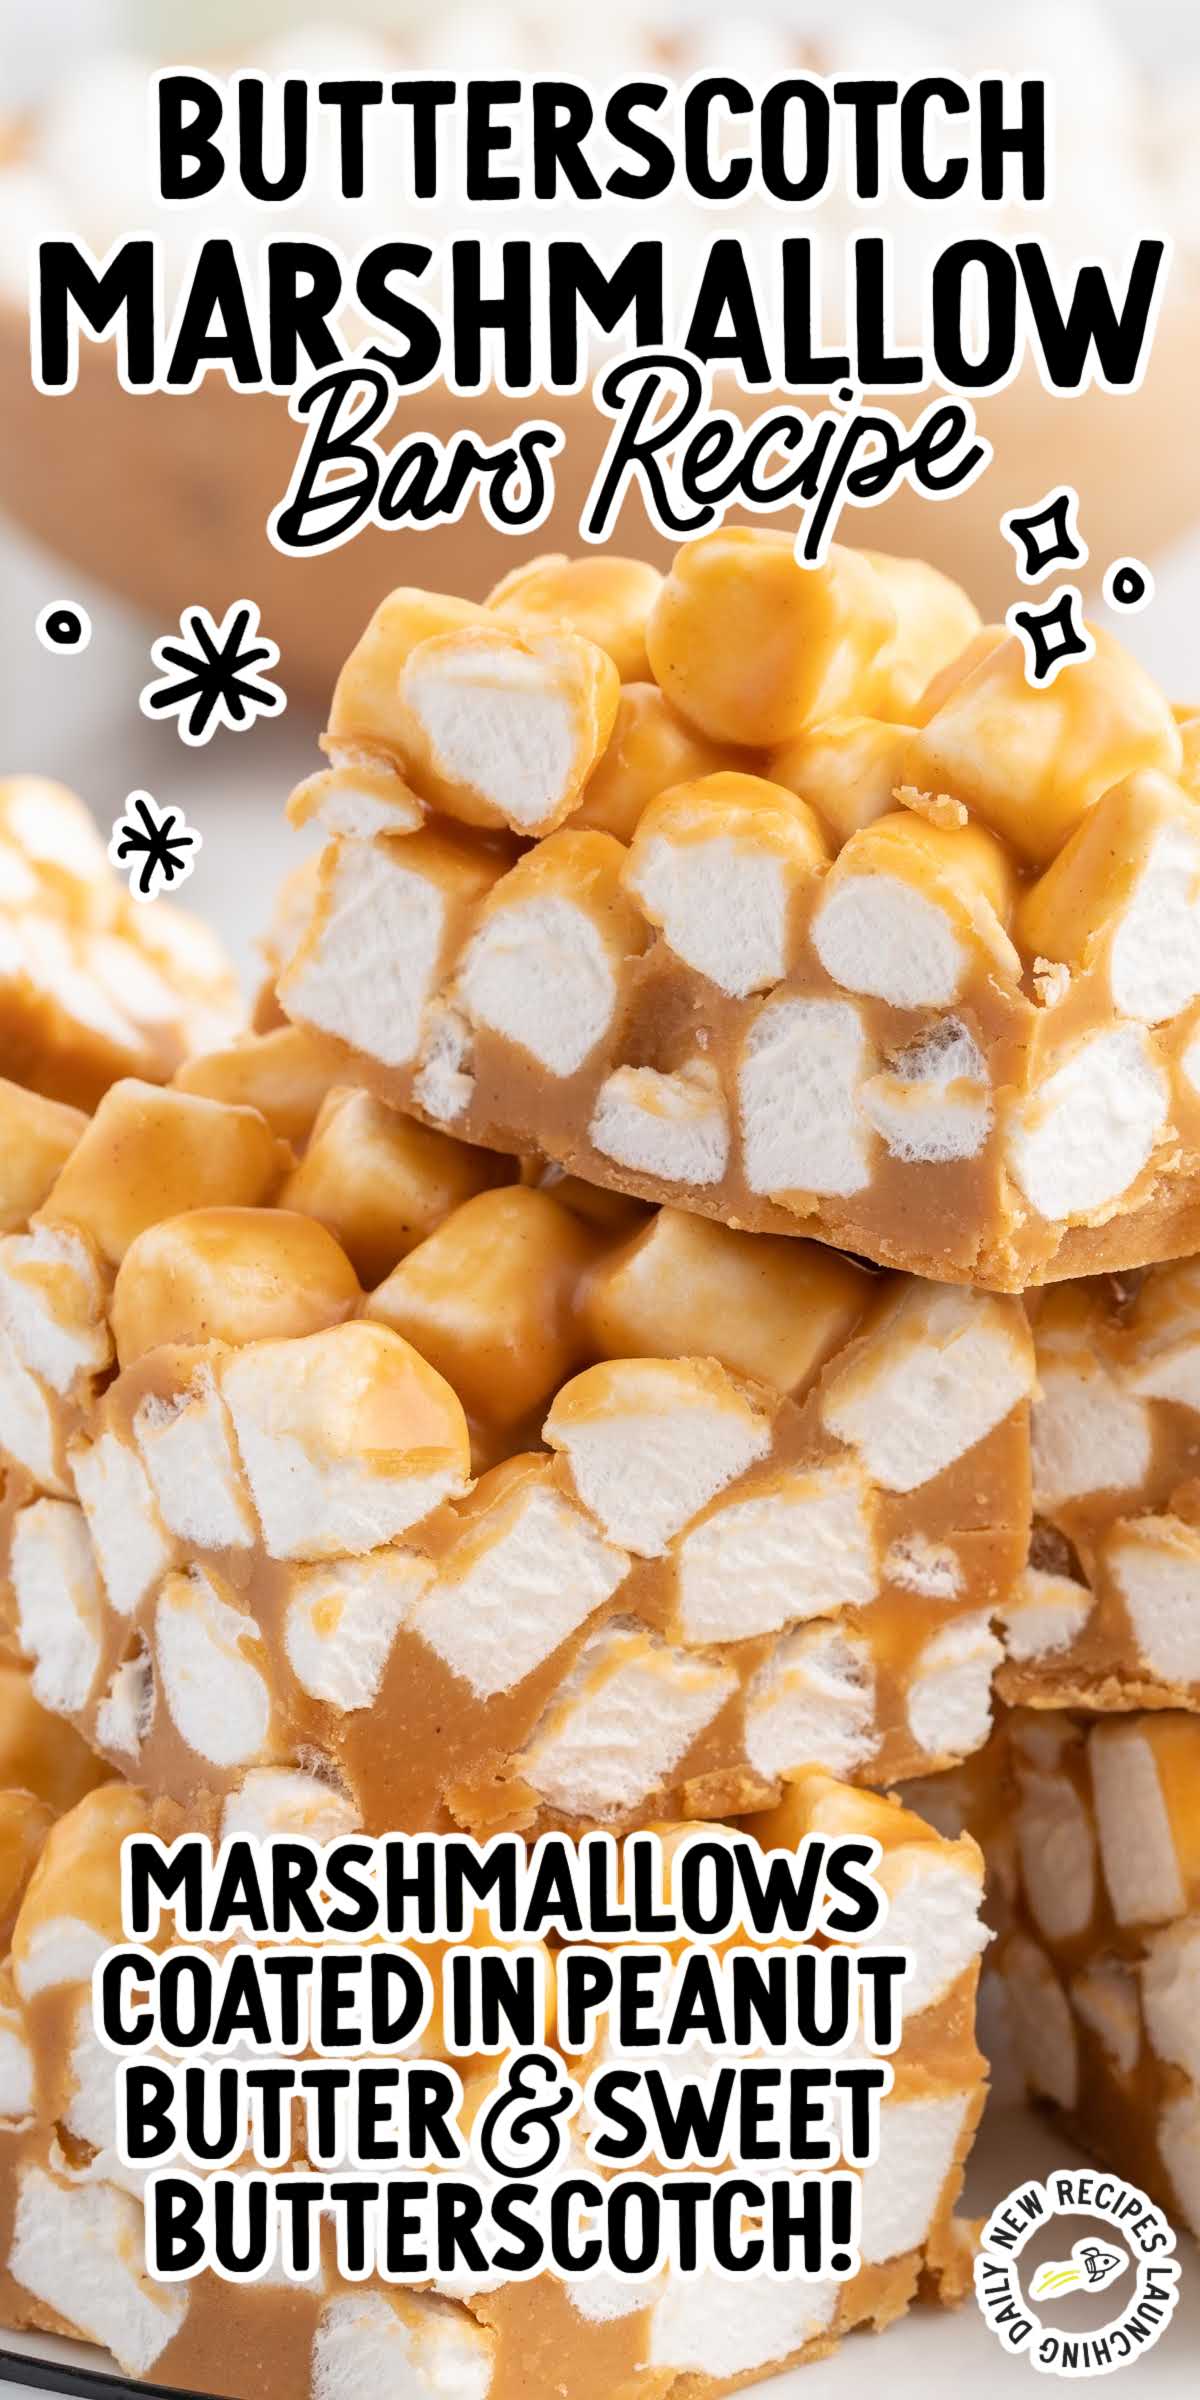 Marshmallow Peanut Butter Squares - Spaceships and Laser Beams